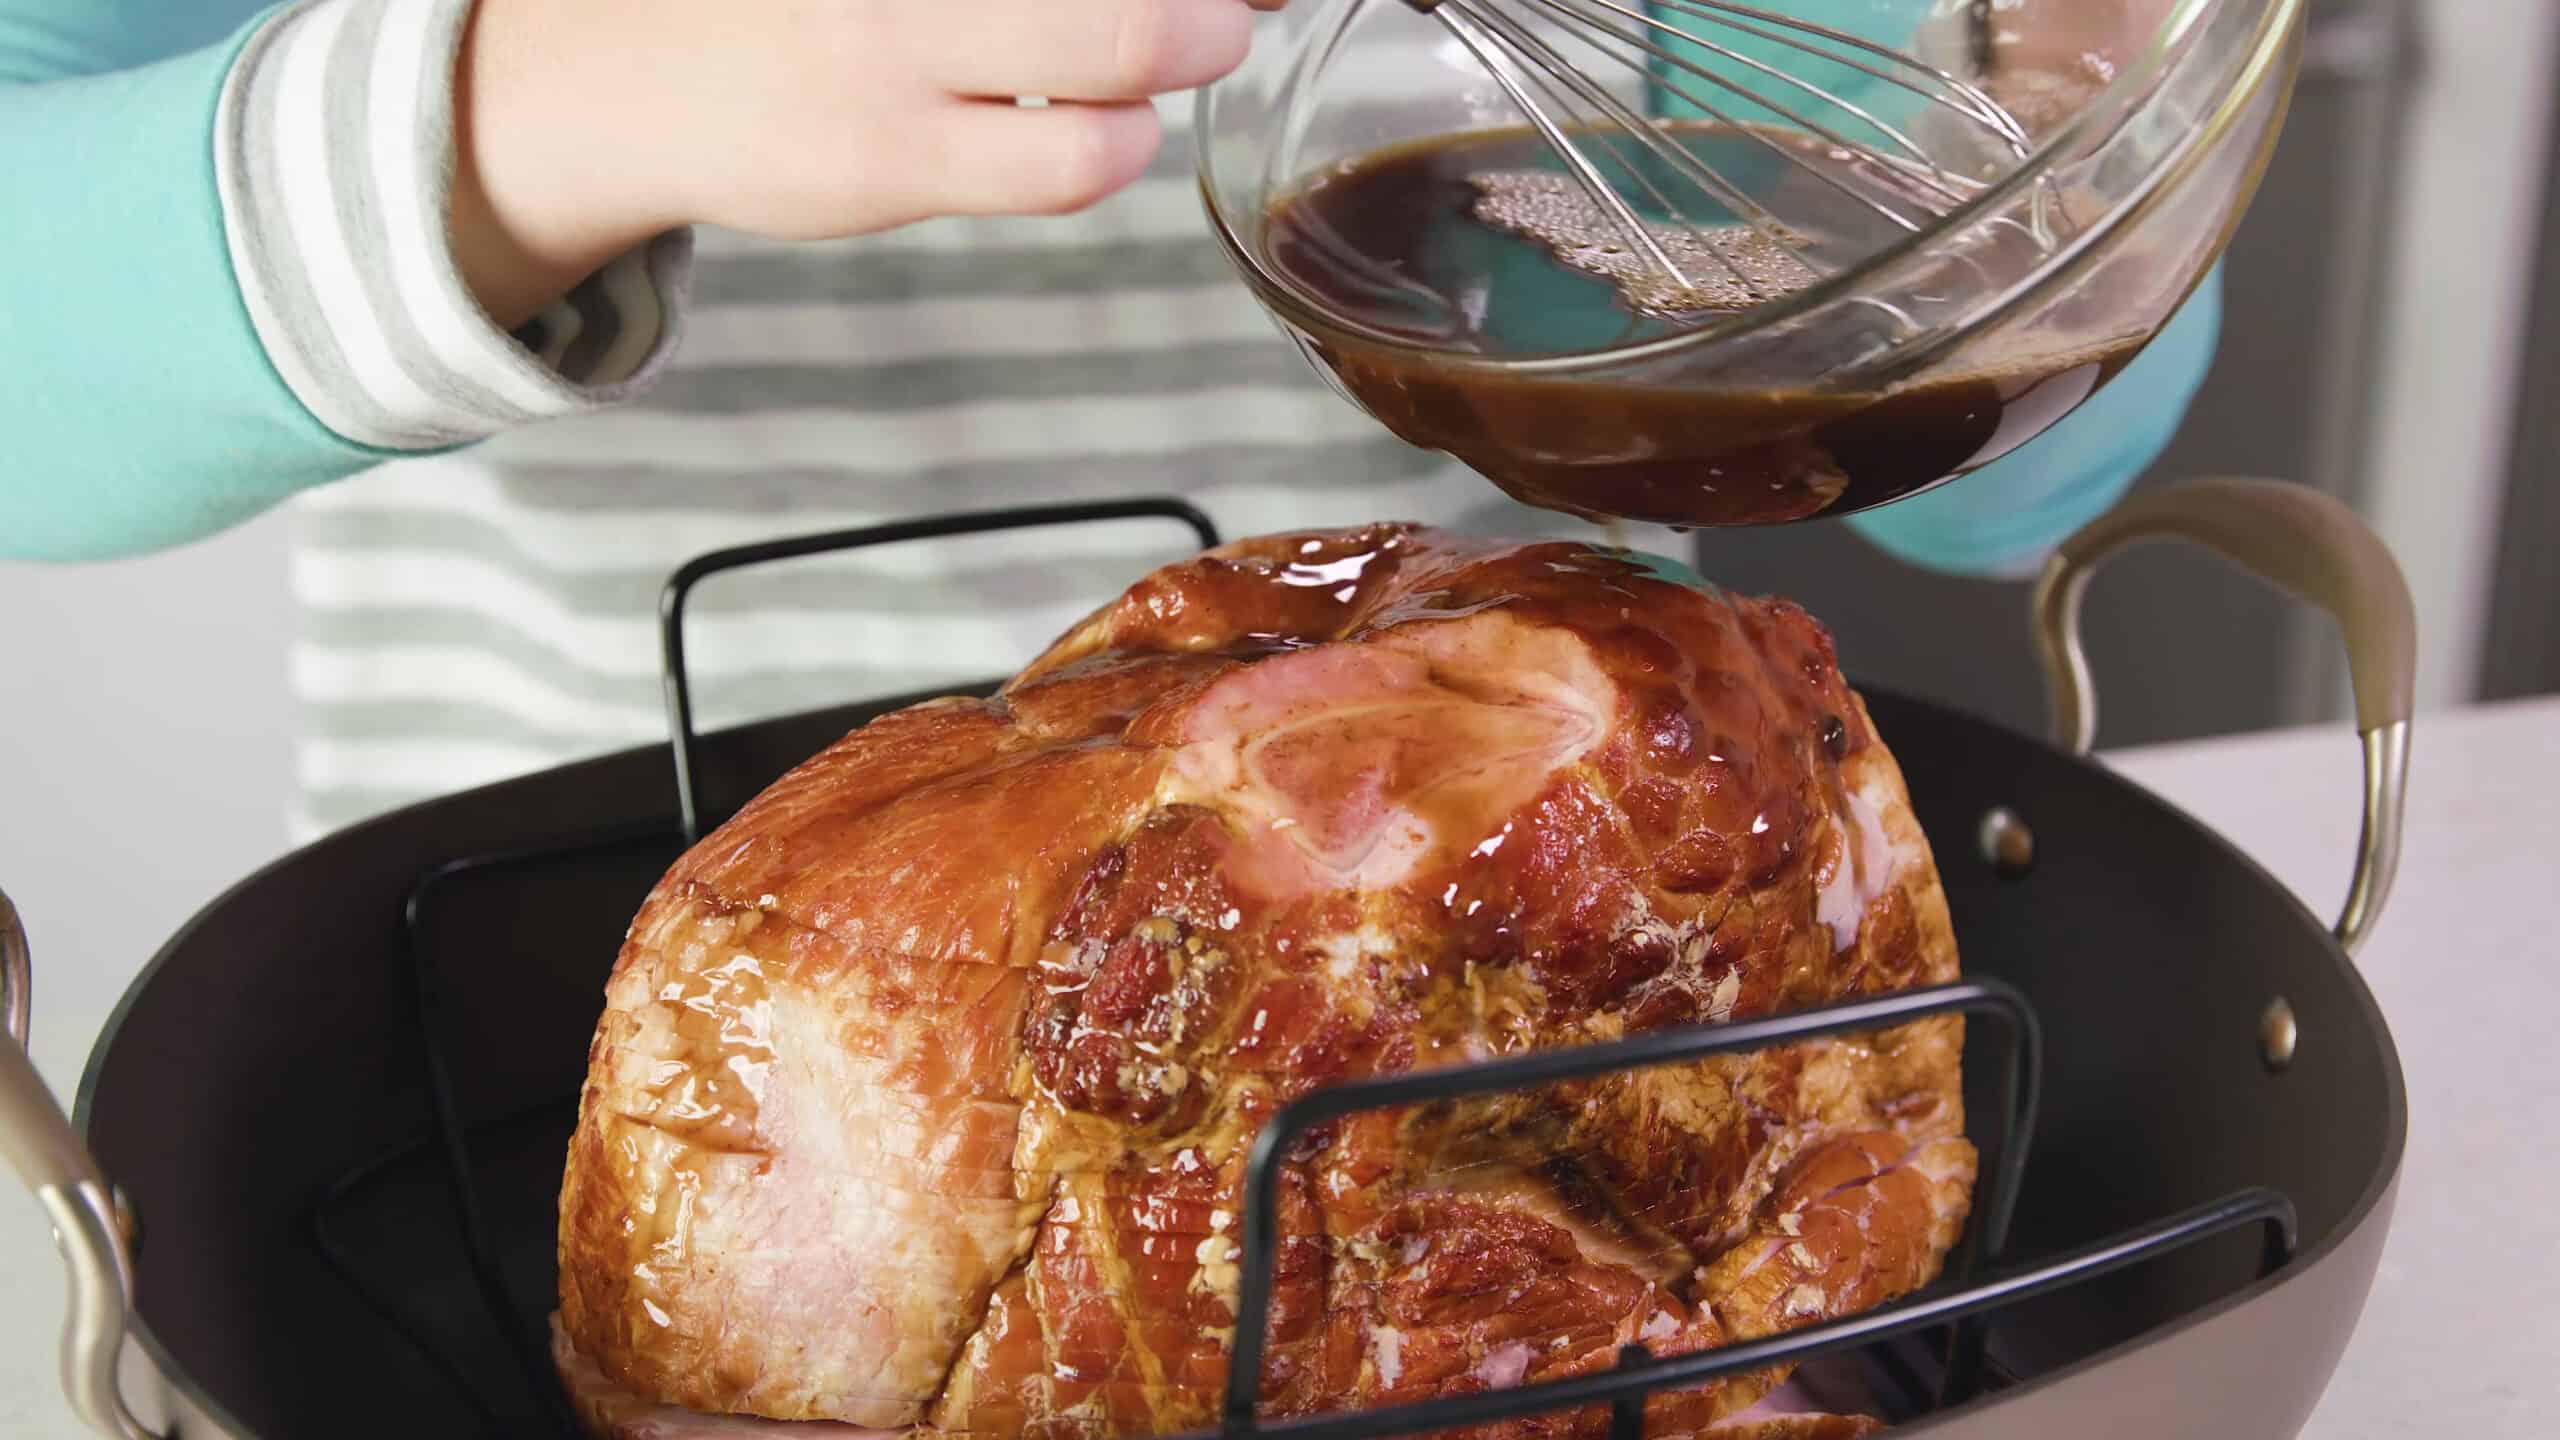 Angled view of stainless steel roasting pan with rack and ham inside and a large glass mixing bowl with orange sauce glaze being pour onto the ham using a wire whisk to guide the liquid out.